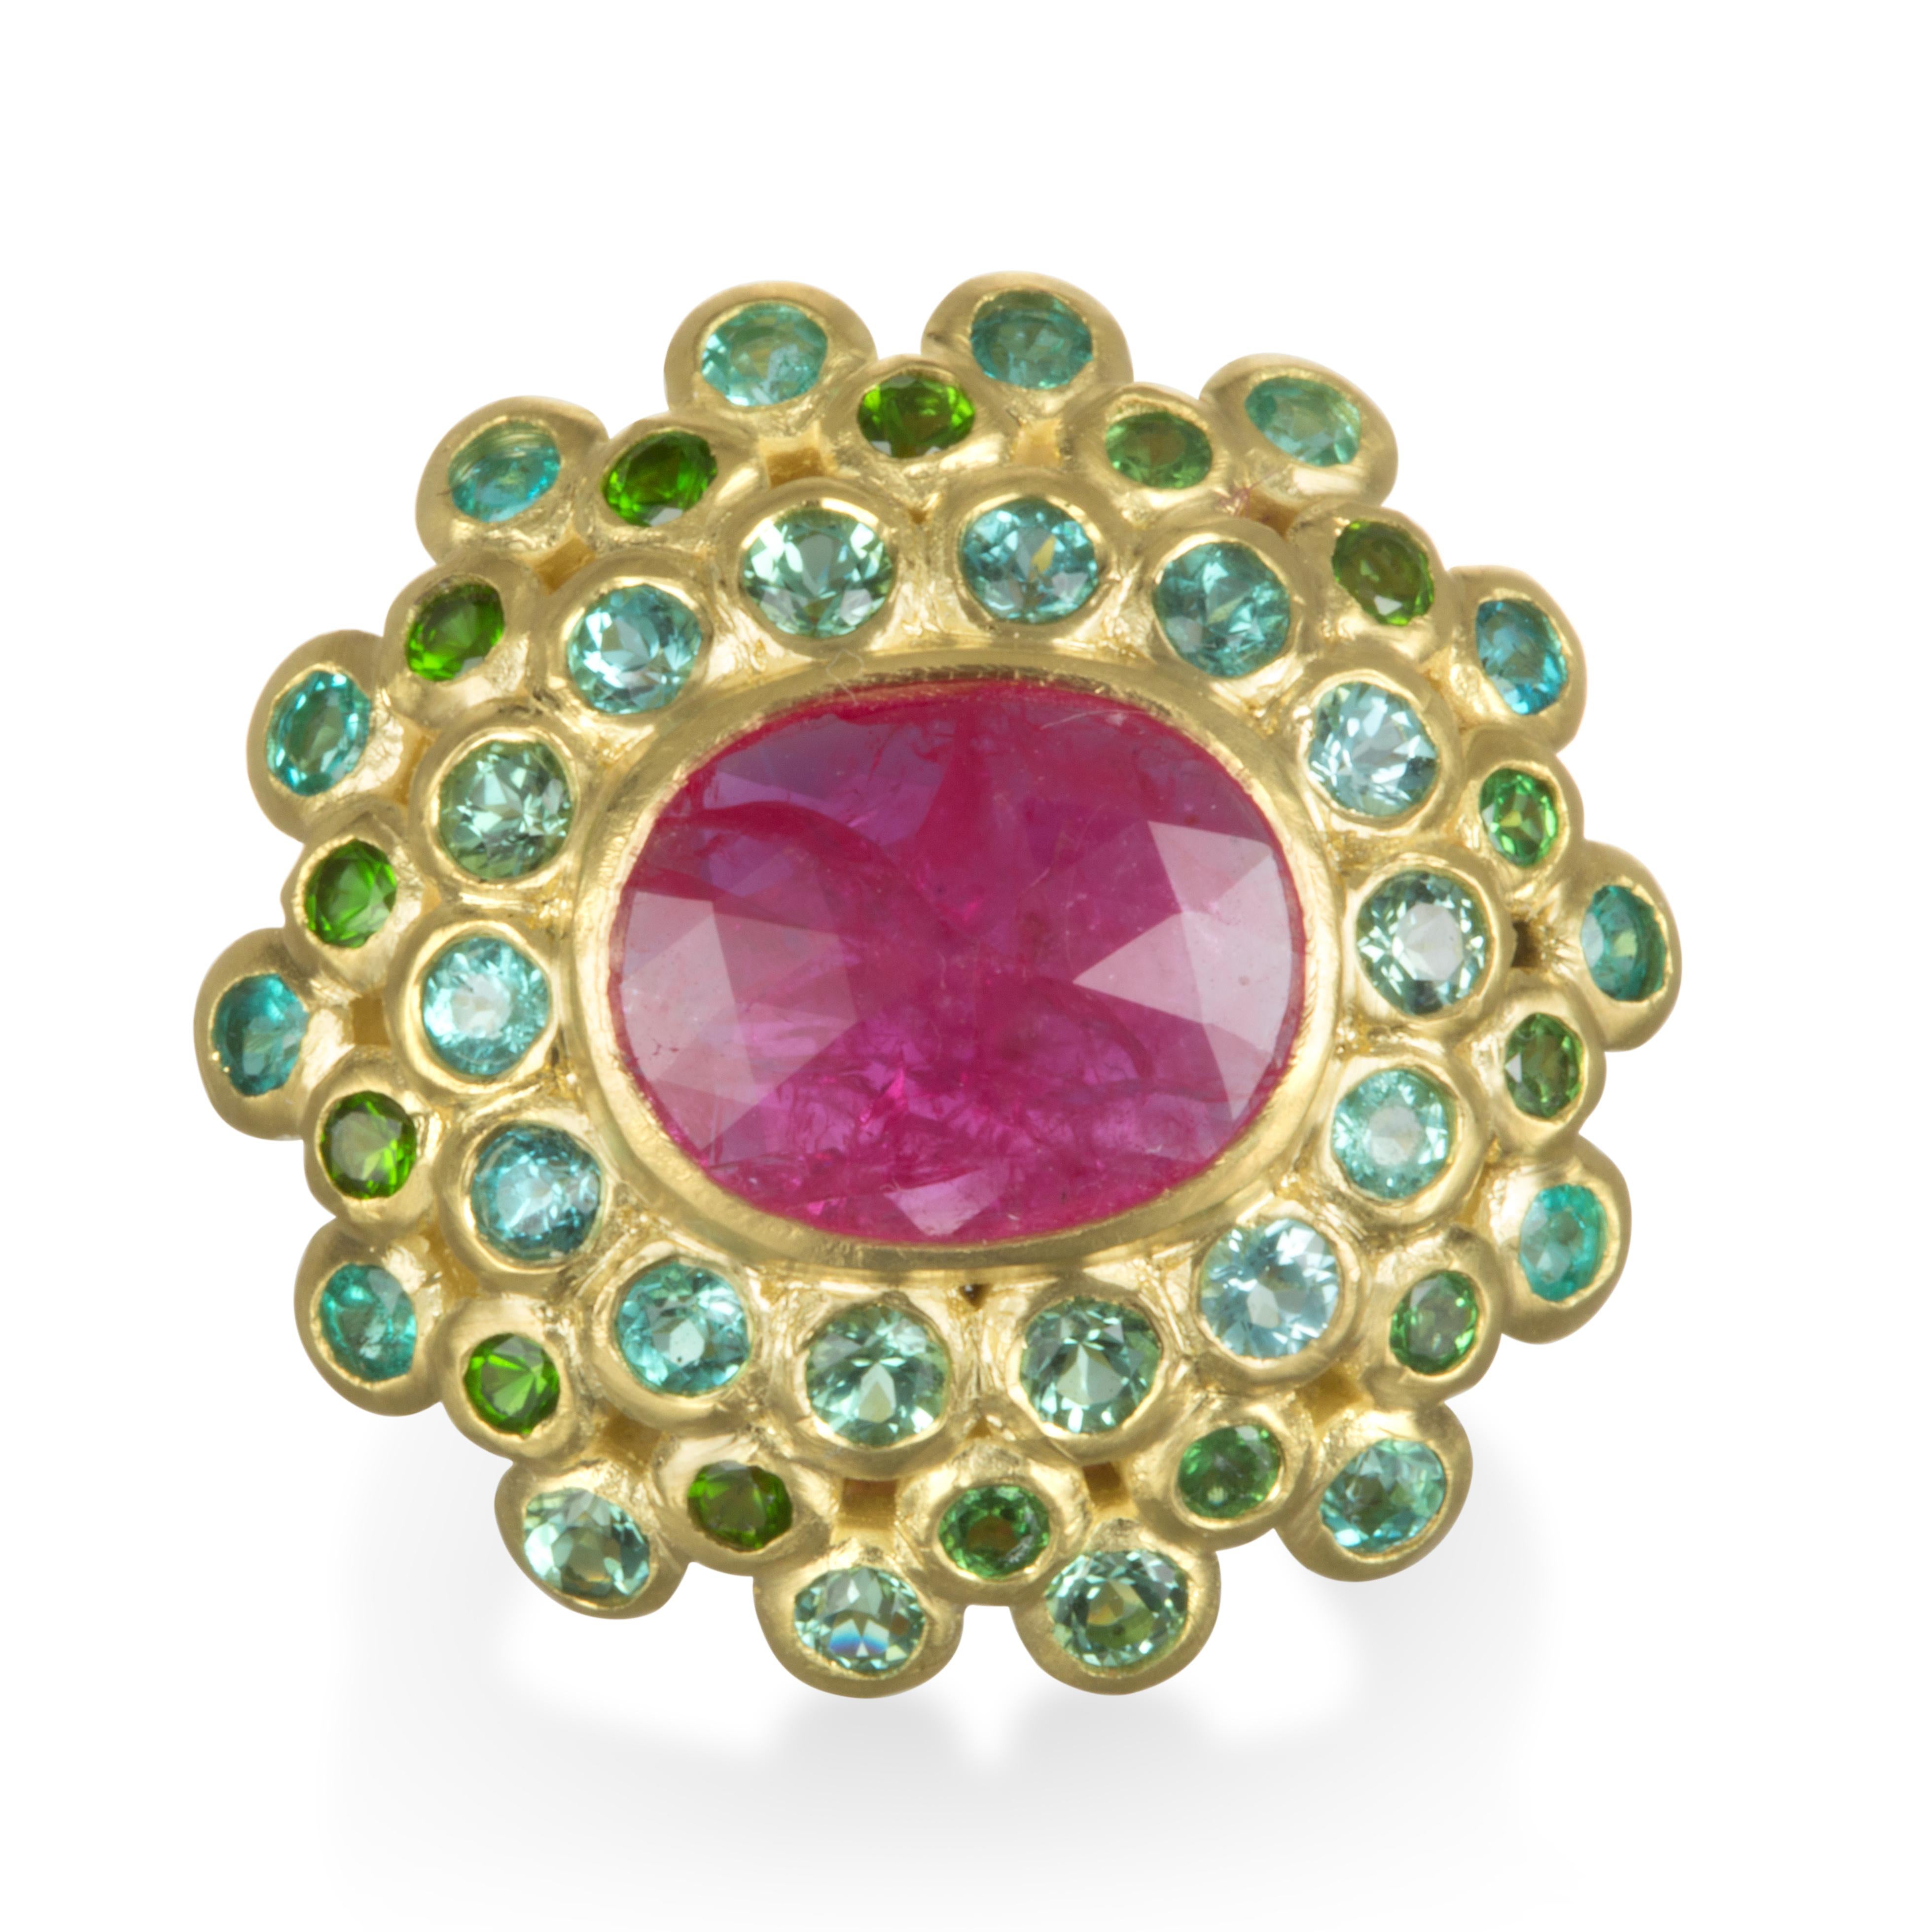 Faye Kim 18k Gold Madagascar Ruby Paraiba Tourmaline and Tsavorite Garnet Ring.

Bold, Beautiful, and Unique 
This is a one of a kind, over-sized ring - a showpiece with eye-popping colors!  The vibrant pink-red color of the Madagascar Ruby is